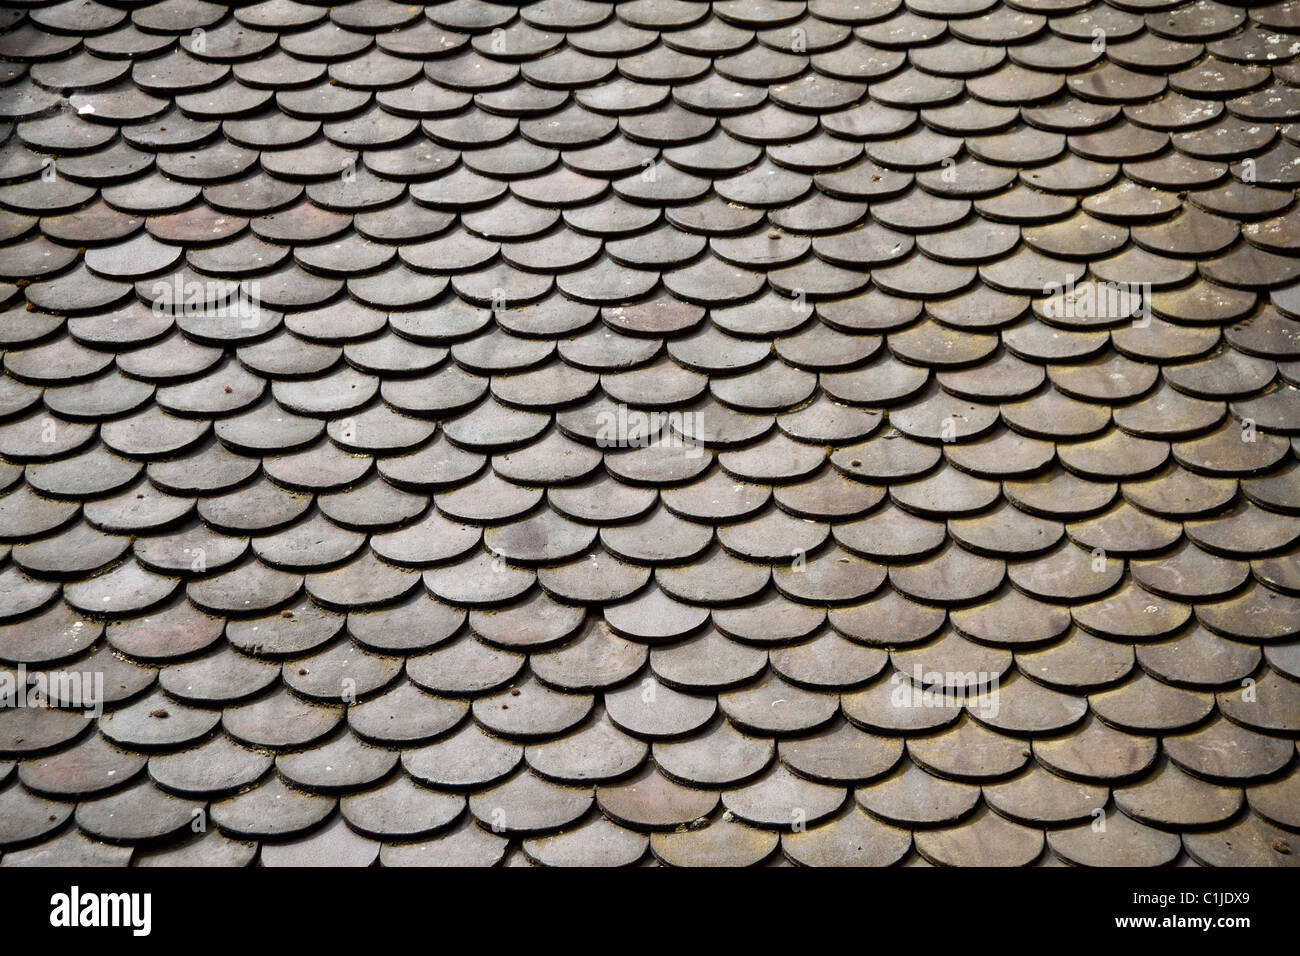 Background tiled roof in nice scaled pattern Stock Photo